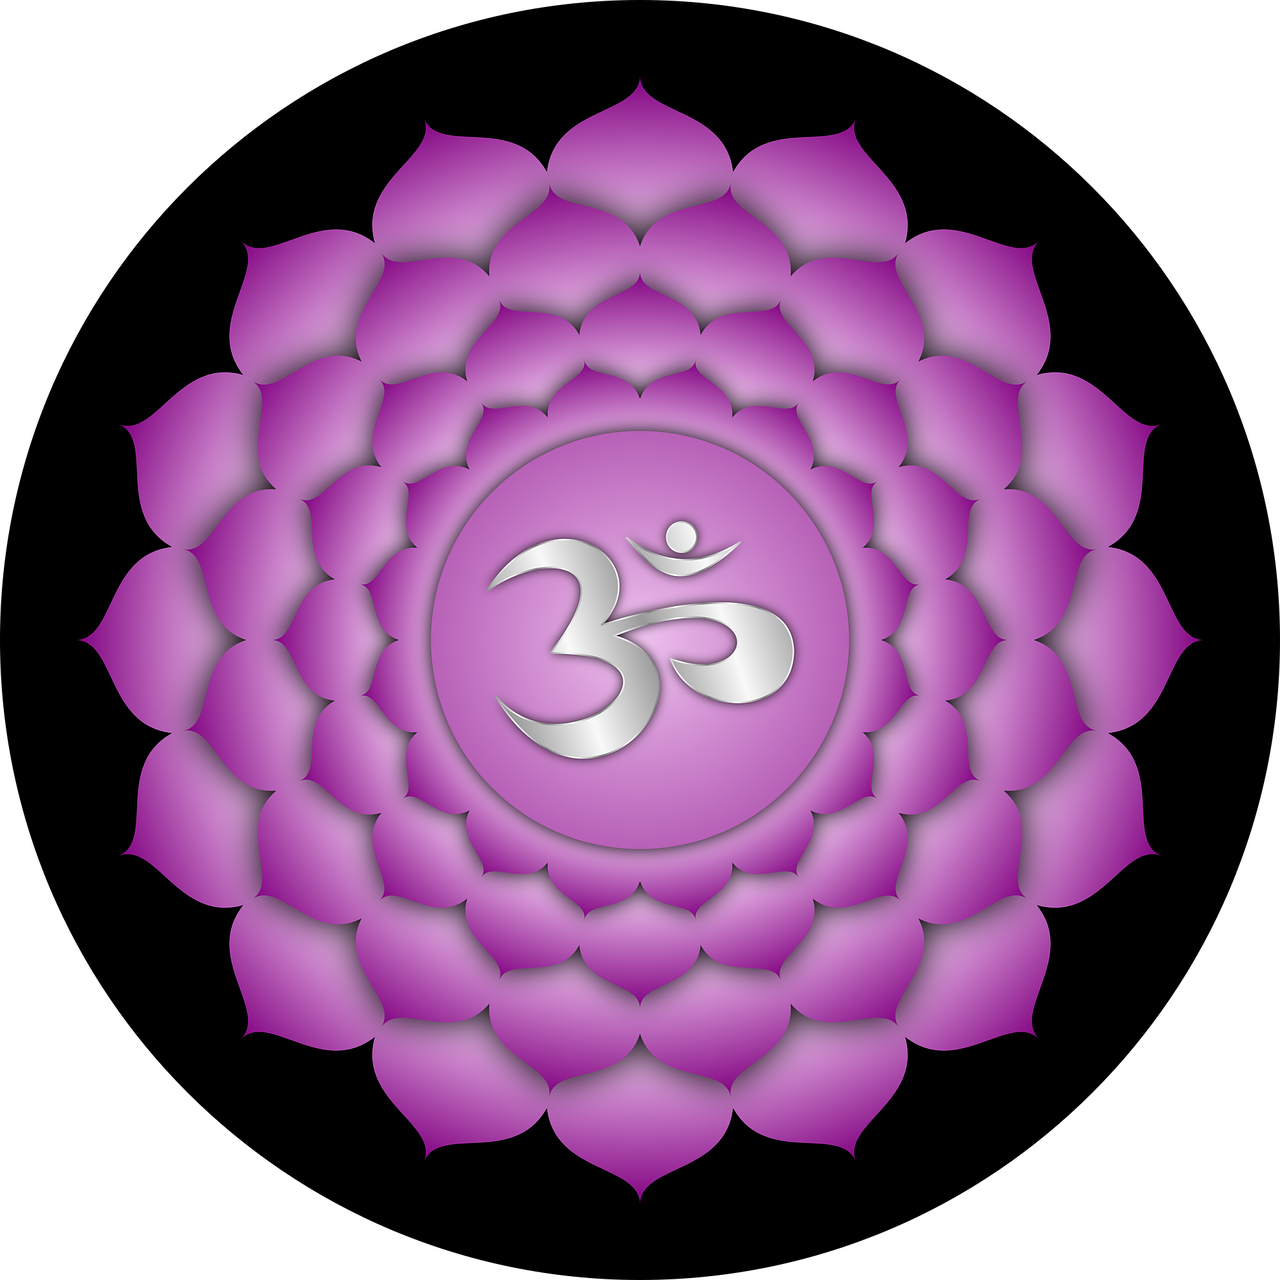 An image showing a thousand petalled lotus which is the symbol for the crown chakra.